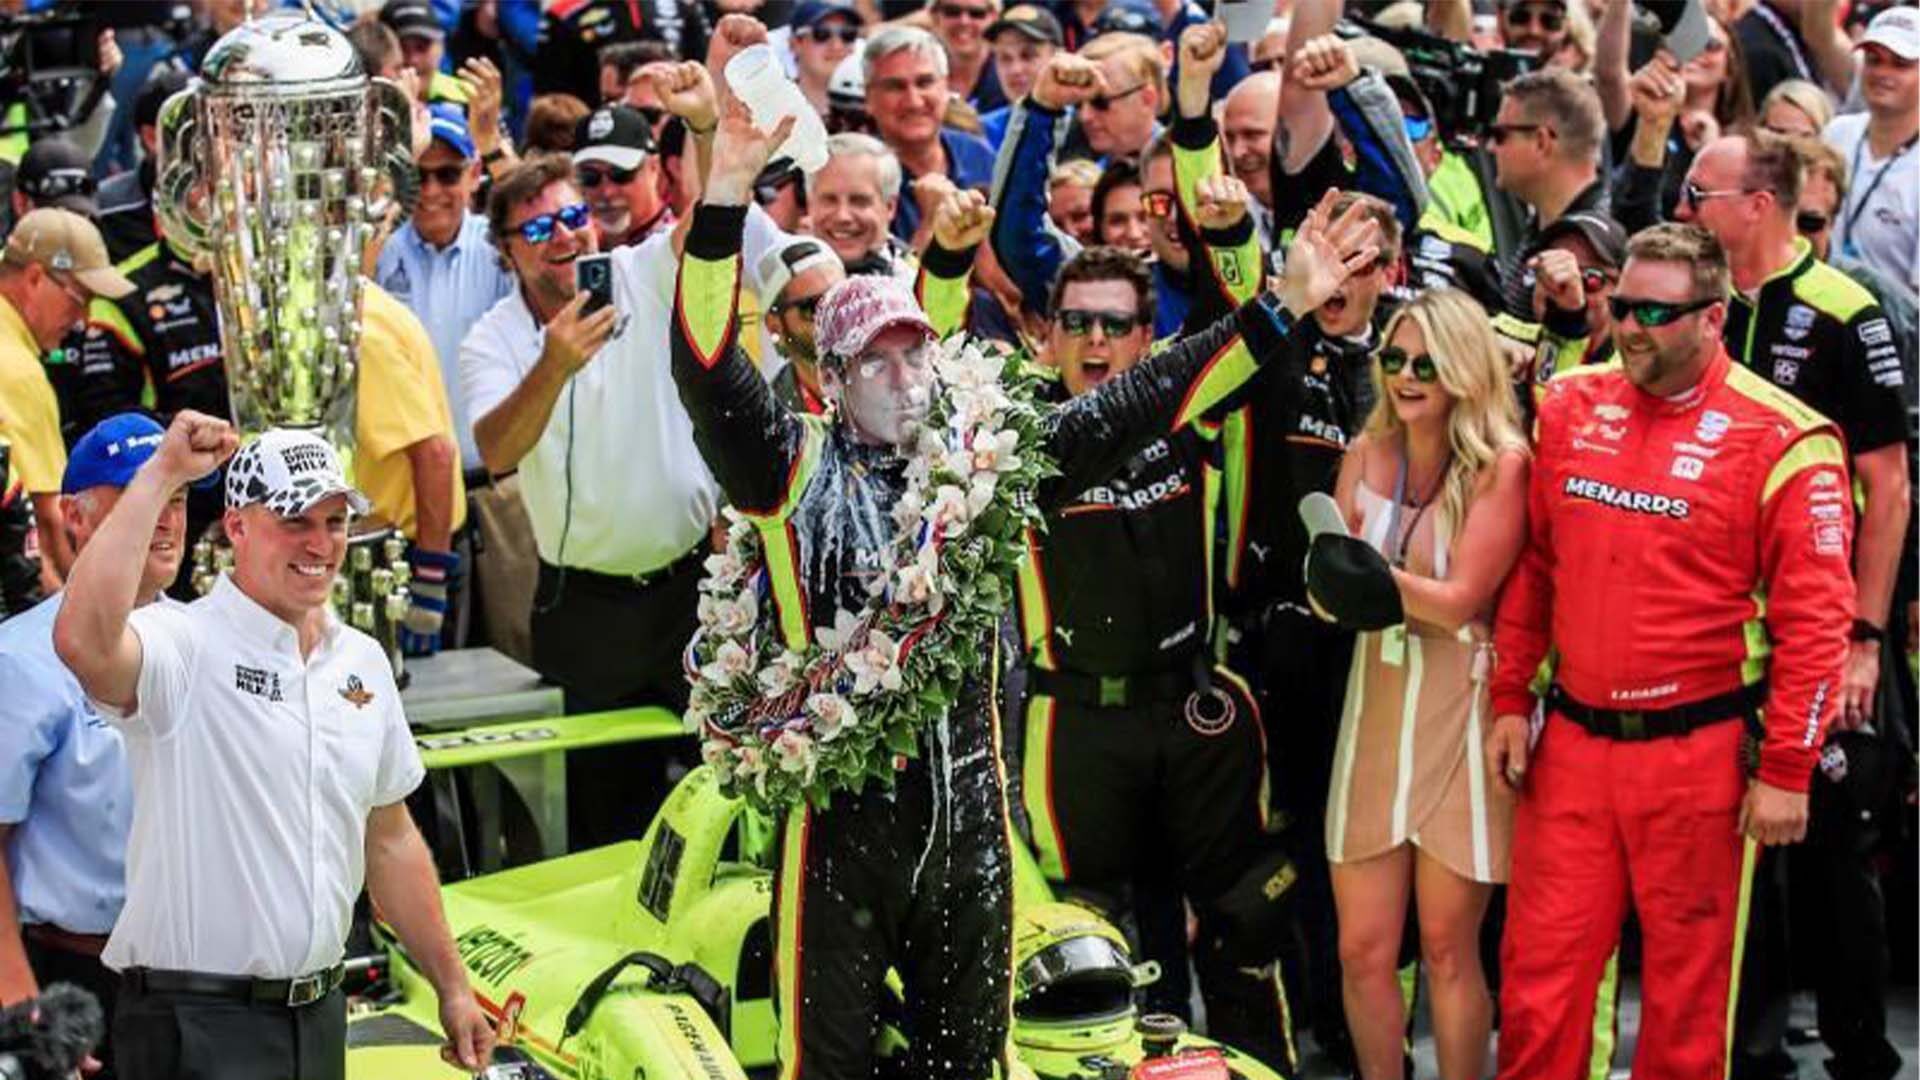 Purdue graduate Andrew Kuehnert, bottom left, presented driver Simon Pagenaud and his team with their milk trophies to celebrate winning the 2019 Indianapolis 500.